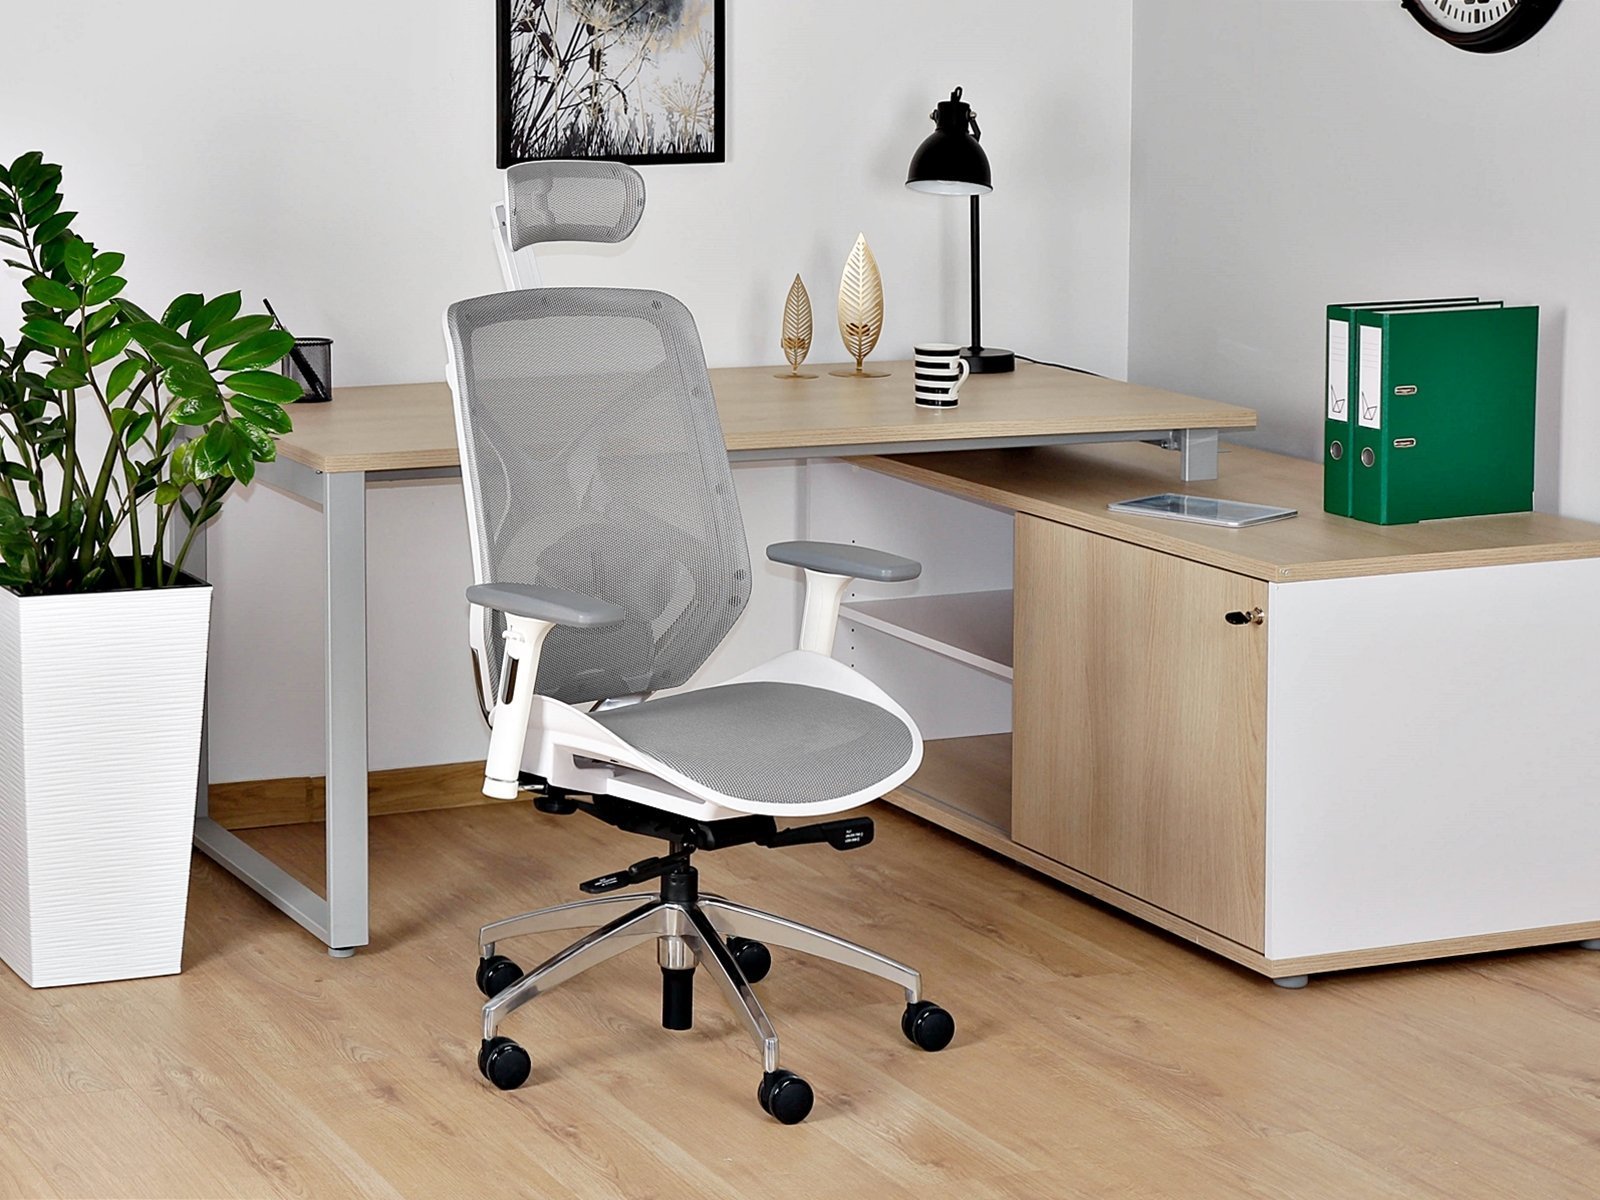 Eng Pl White Office Chairs Unique HERO With Mesh Seat Modern Office Chair Cheap 80 6 